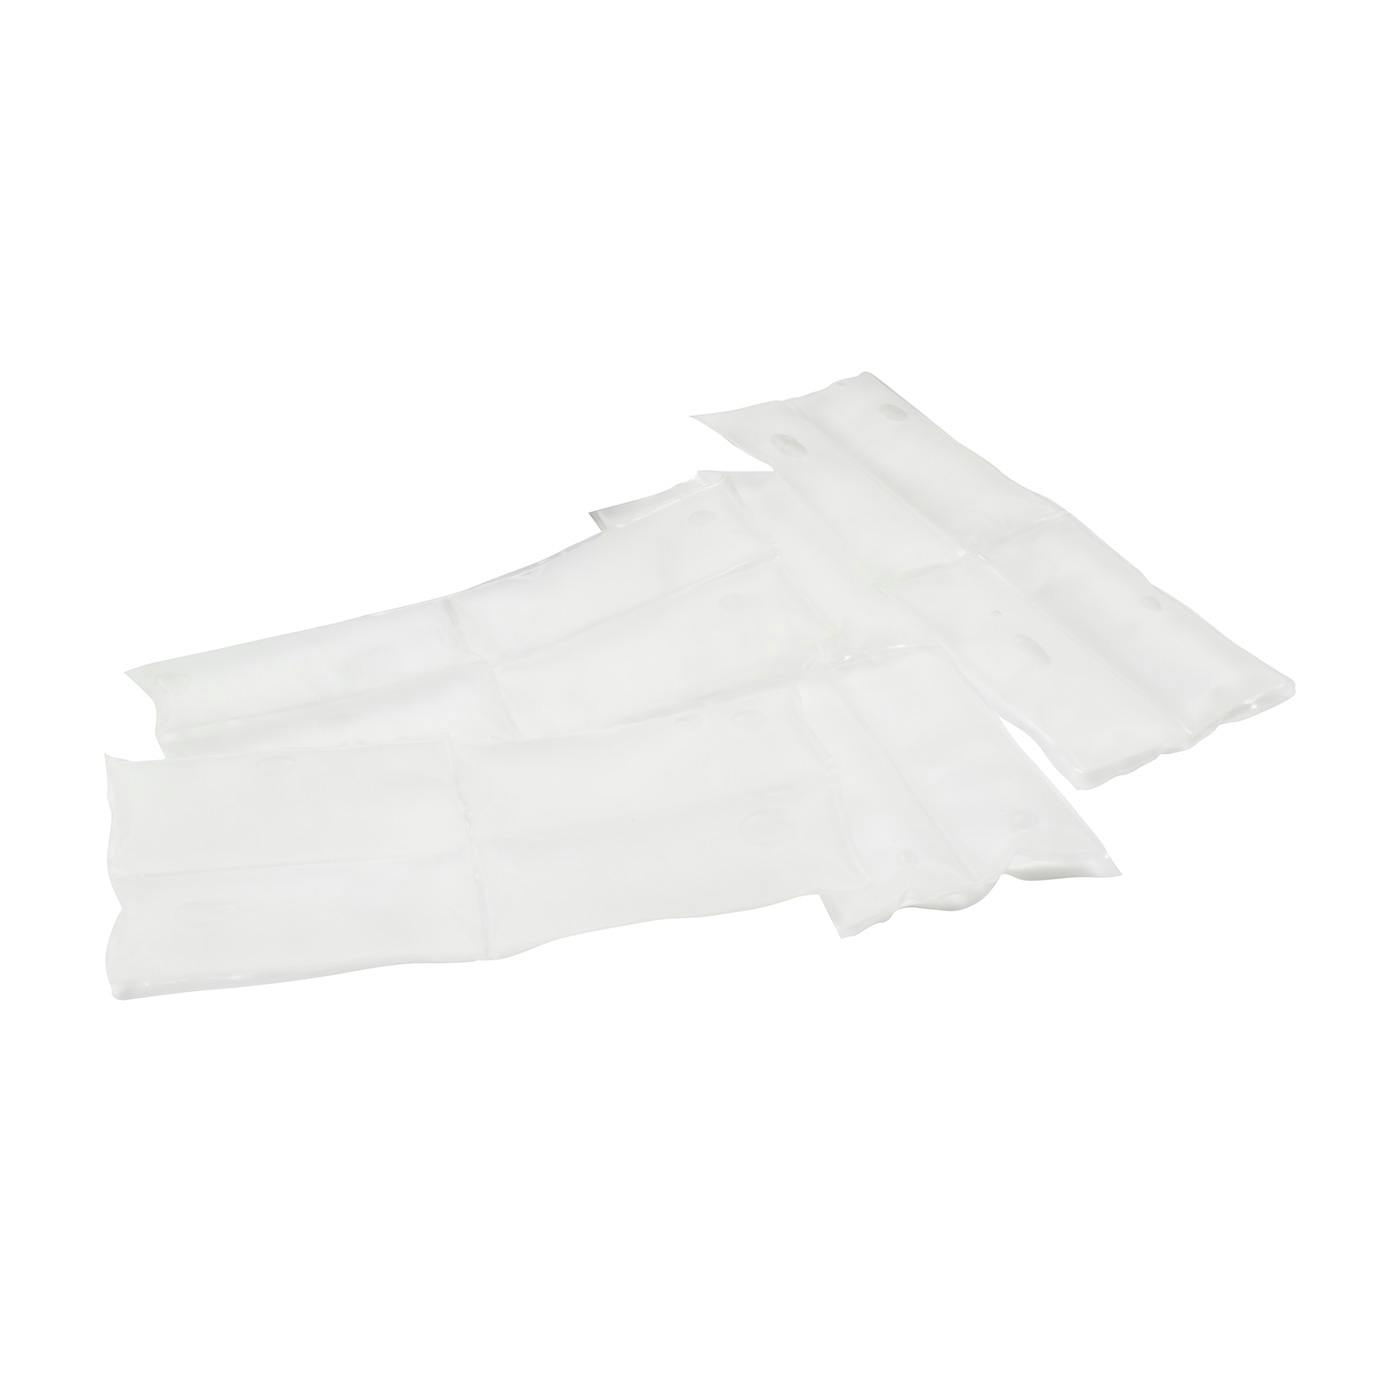 Replacement Cooling Packs - 4-Pack, Clear (390-PC099) - OS